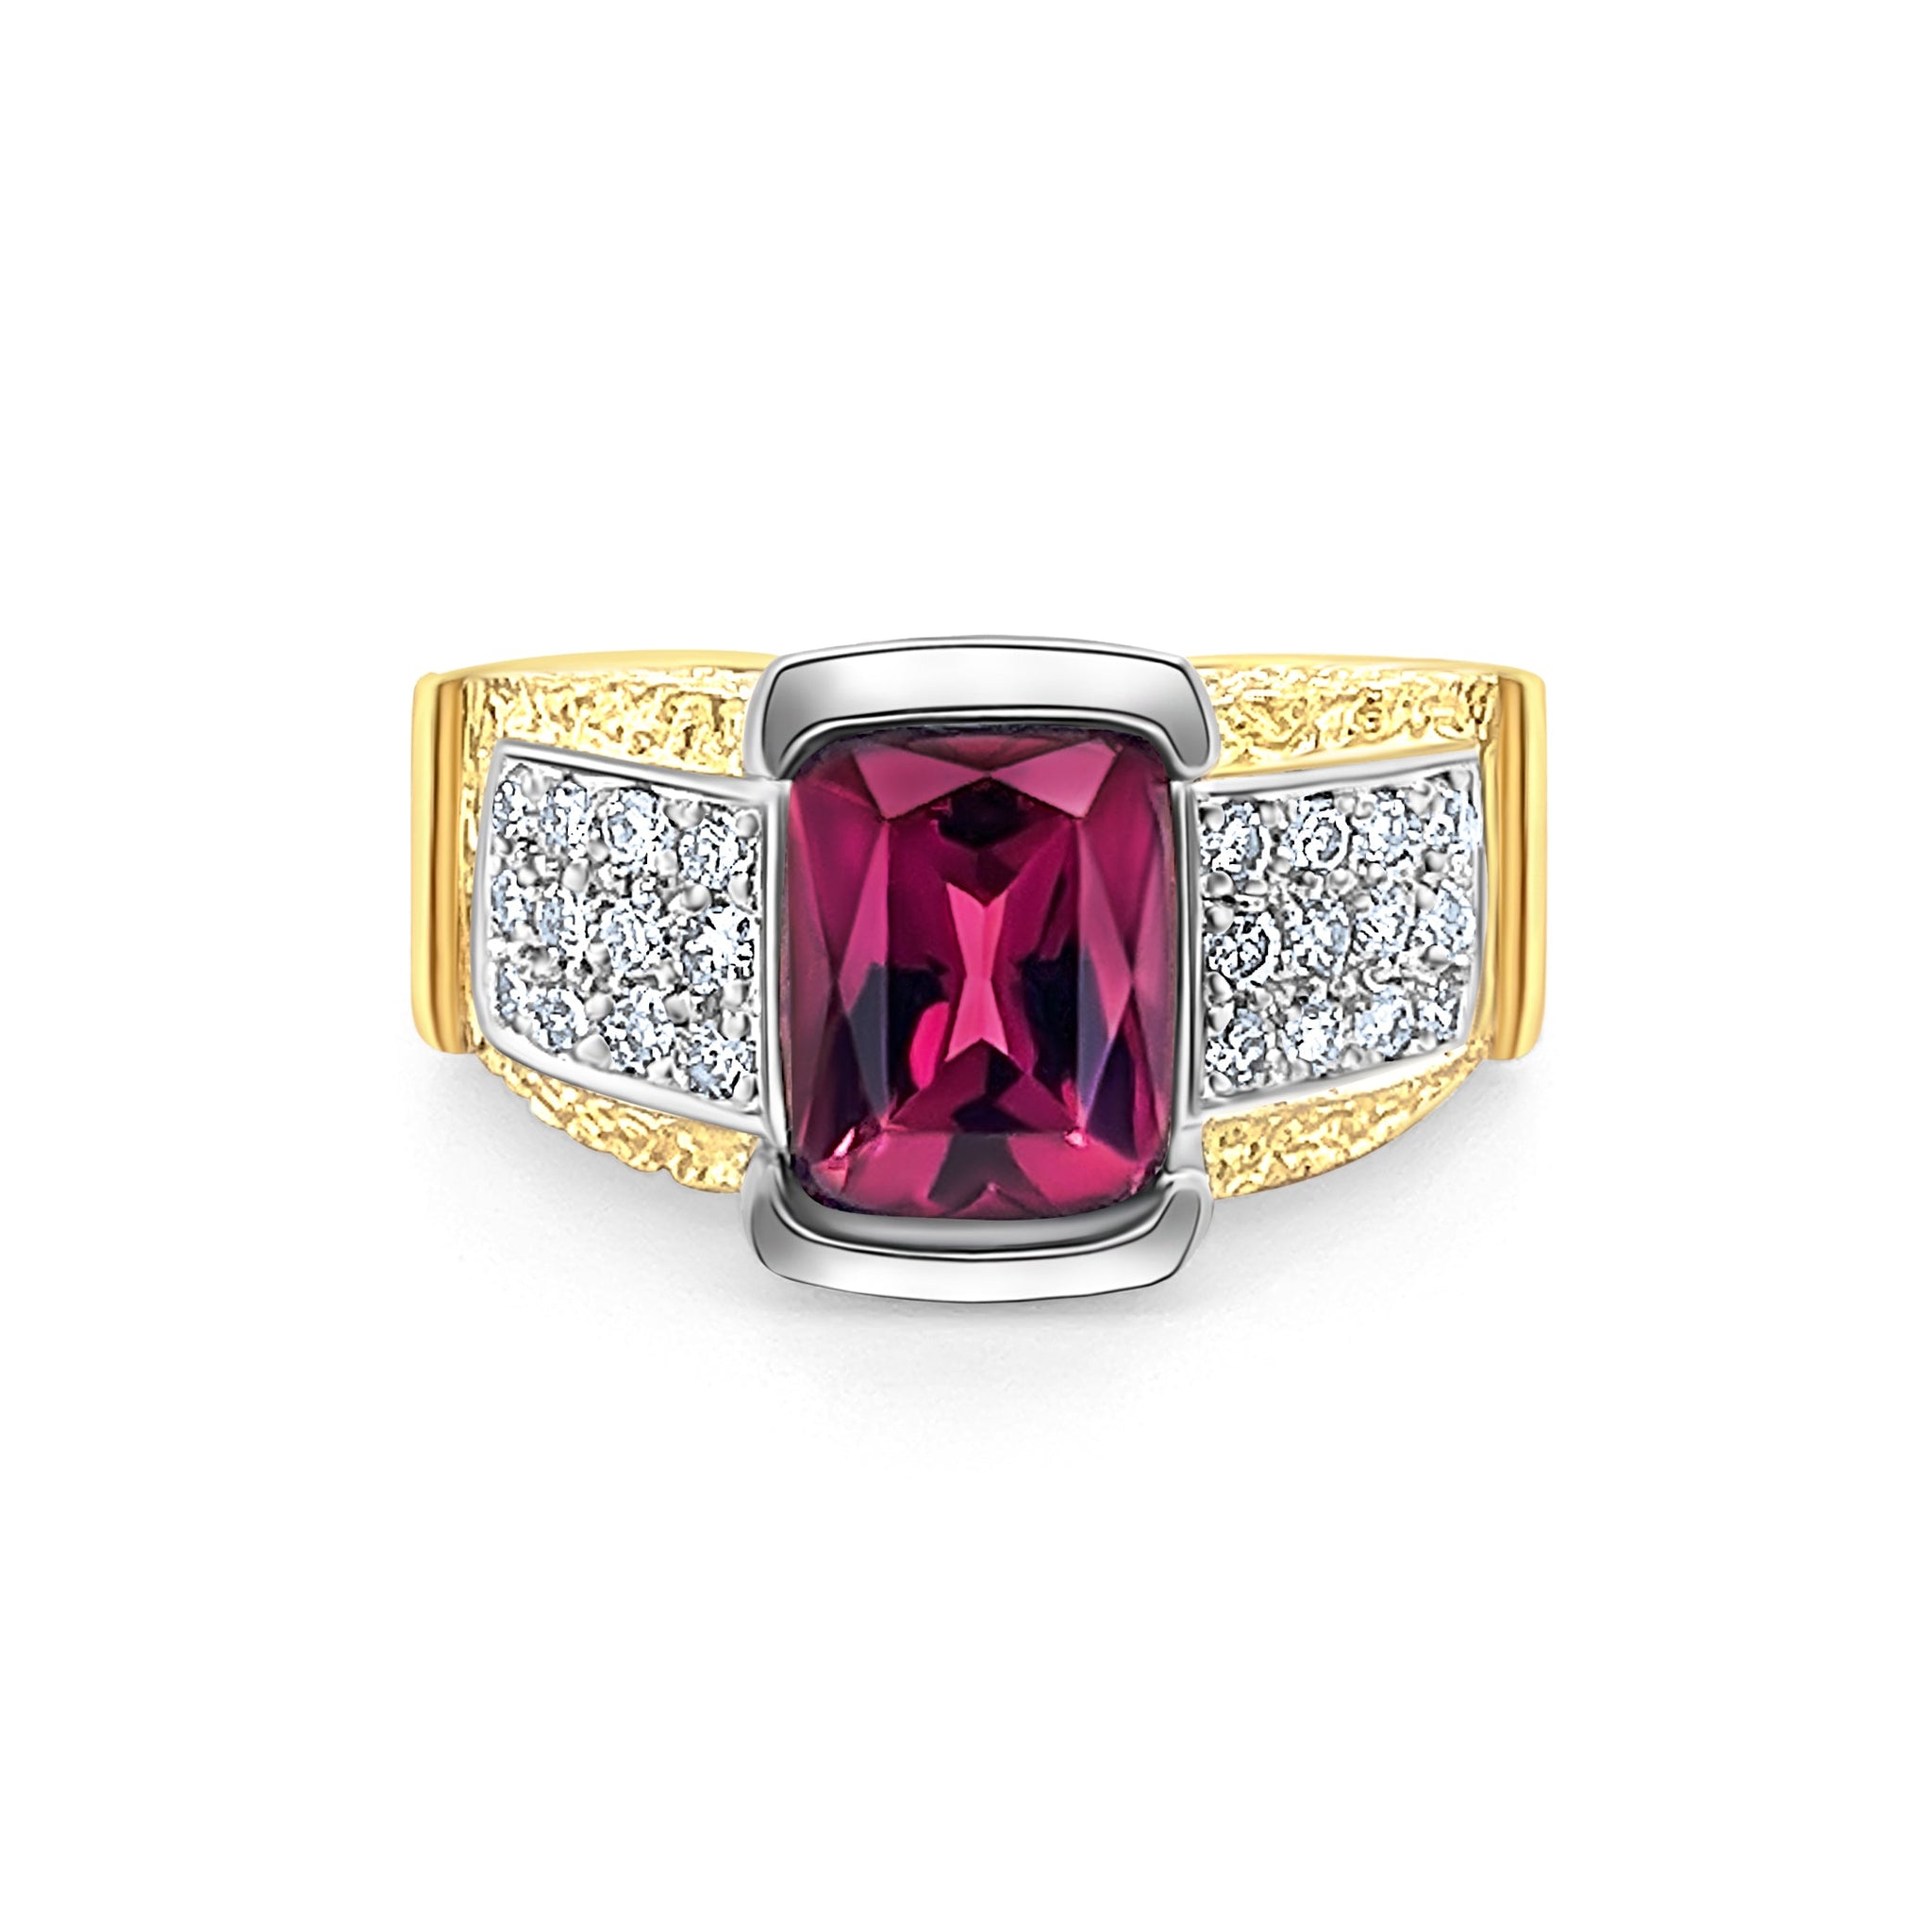 Vintage Radiant Cut 4.50 Carat Red Rubellite Tourmaline and Diamond Ring in Platinum and 18K Gold